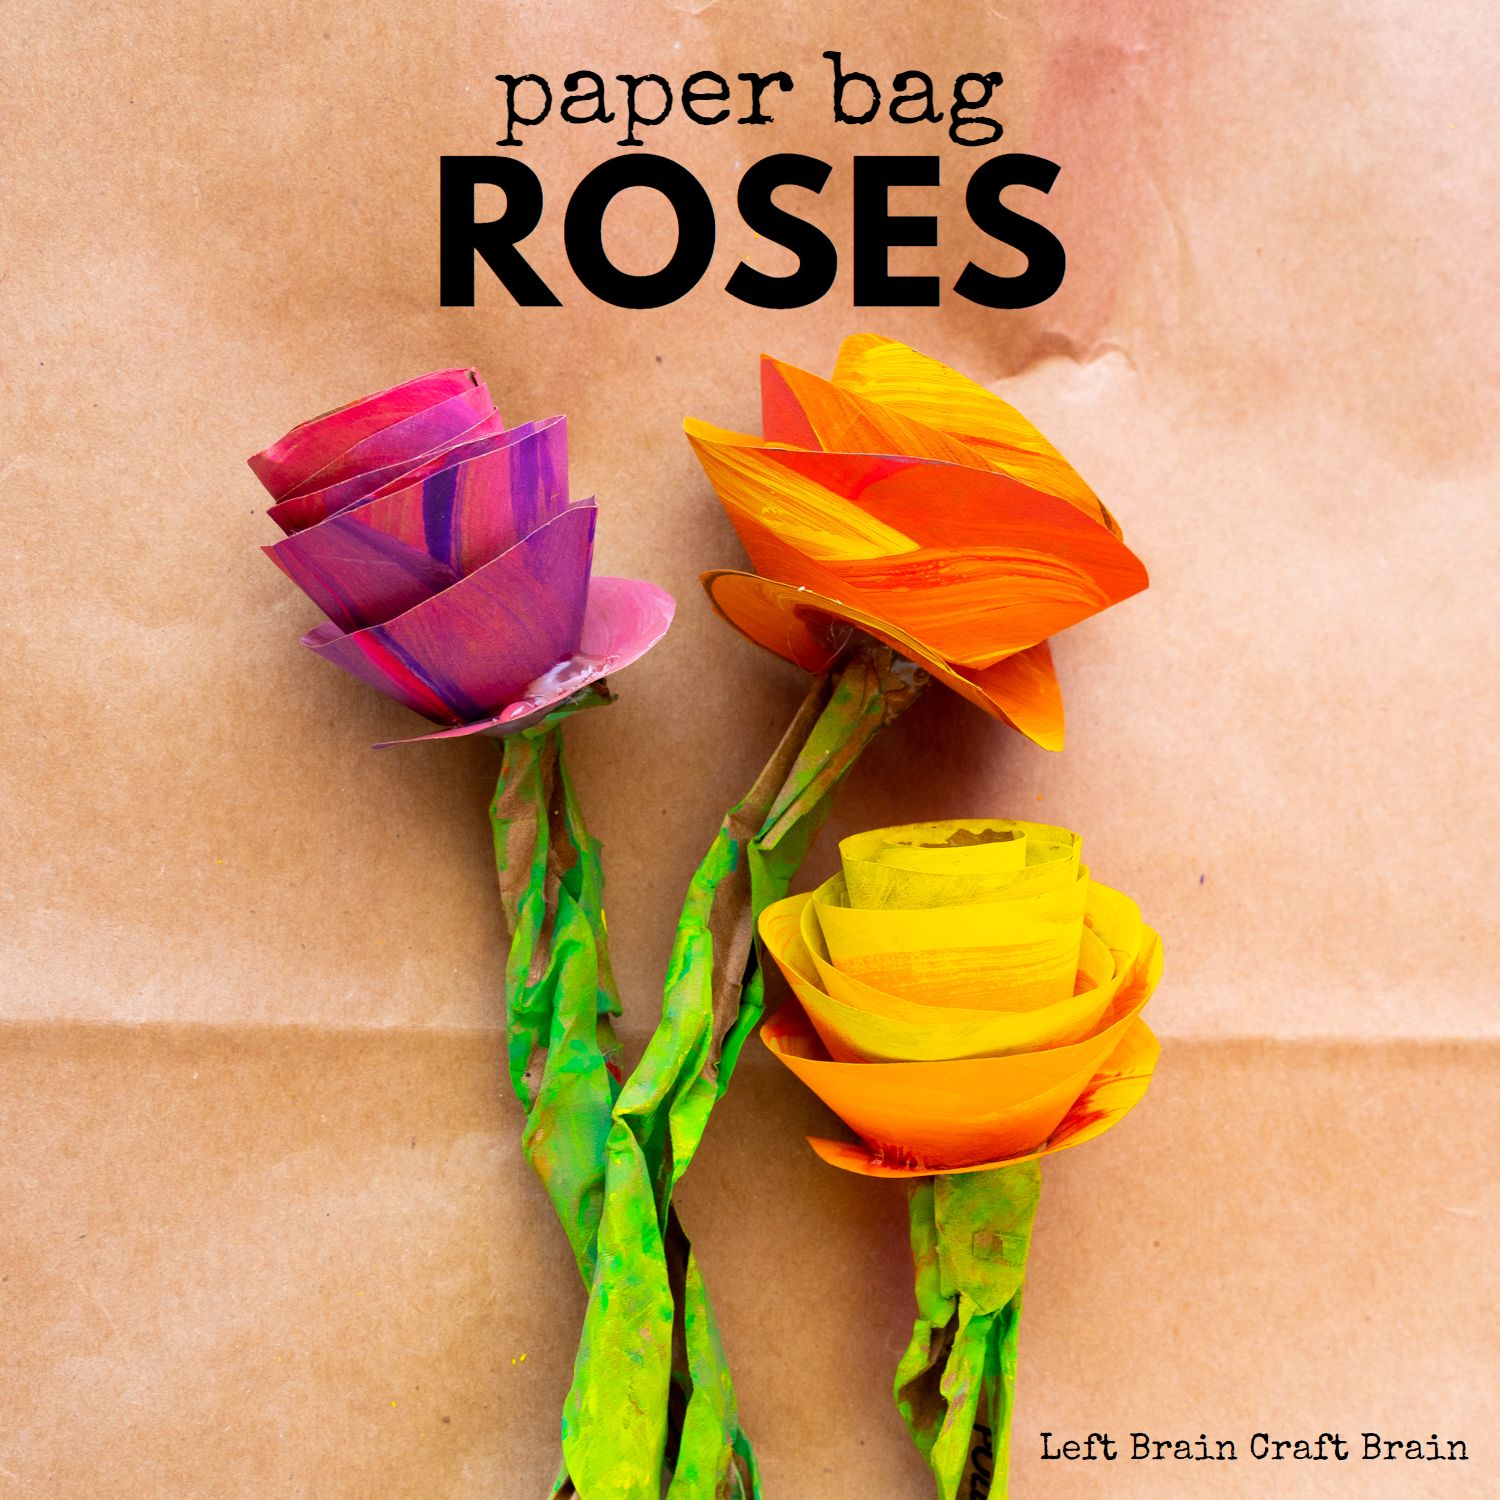 Give plain grocery bags a gorgeous floral treatment with this paper roses craft! Paper roses make a great gift from the kids.